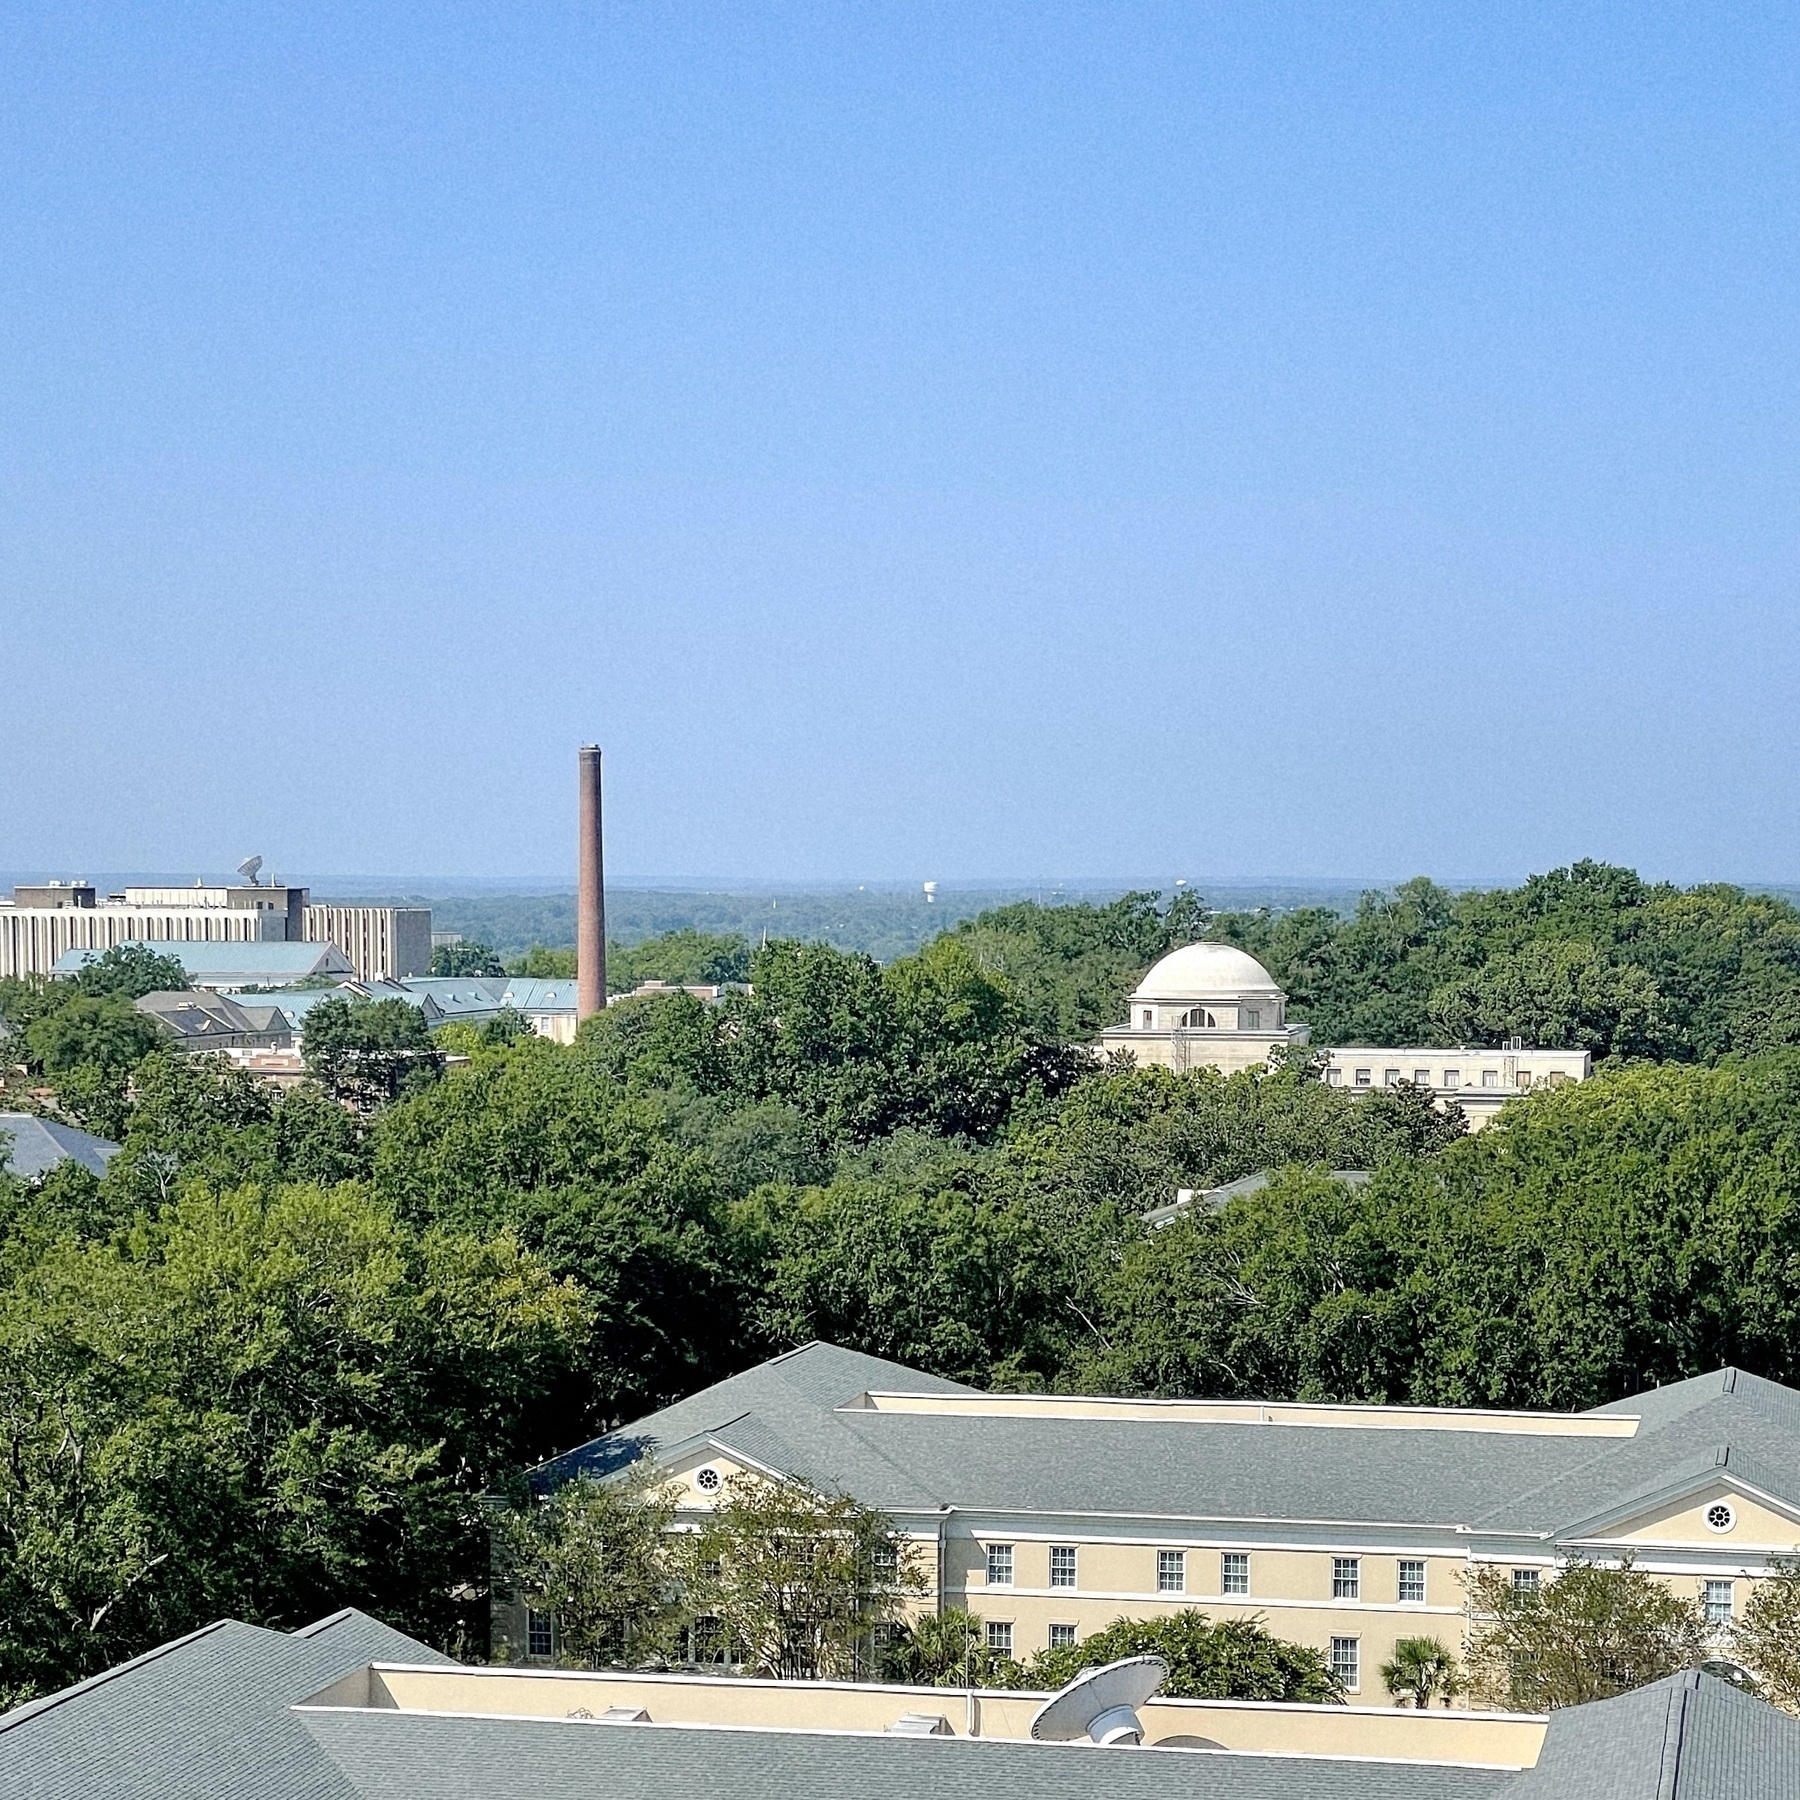 View of the University of South Carolina campus from the 8th floor of the Close-Hipp building